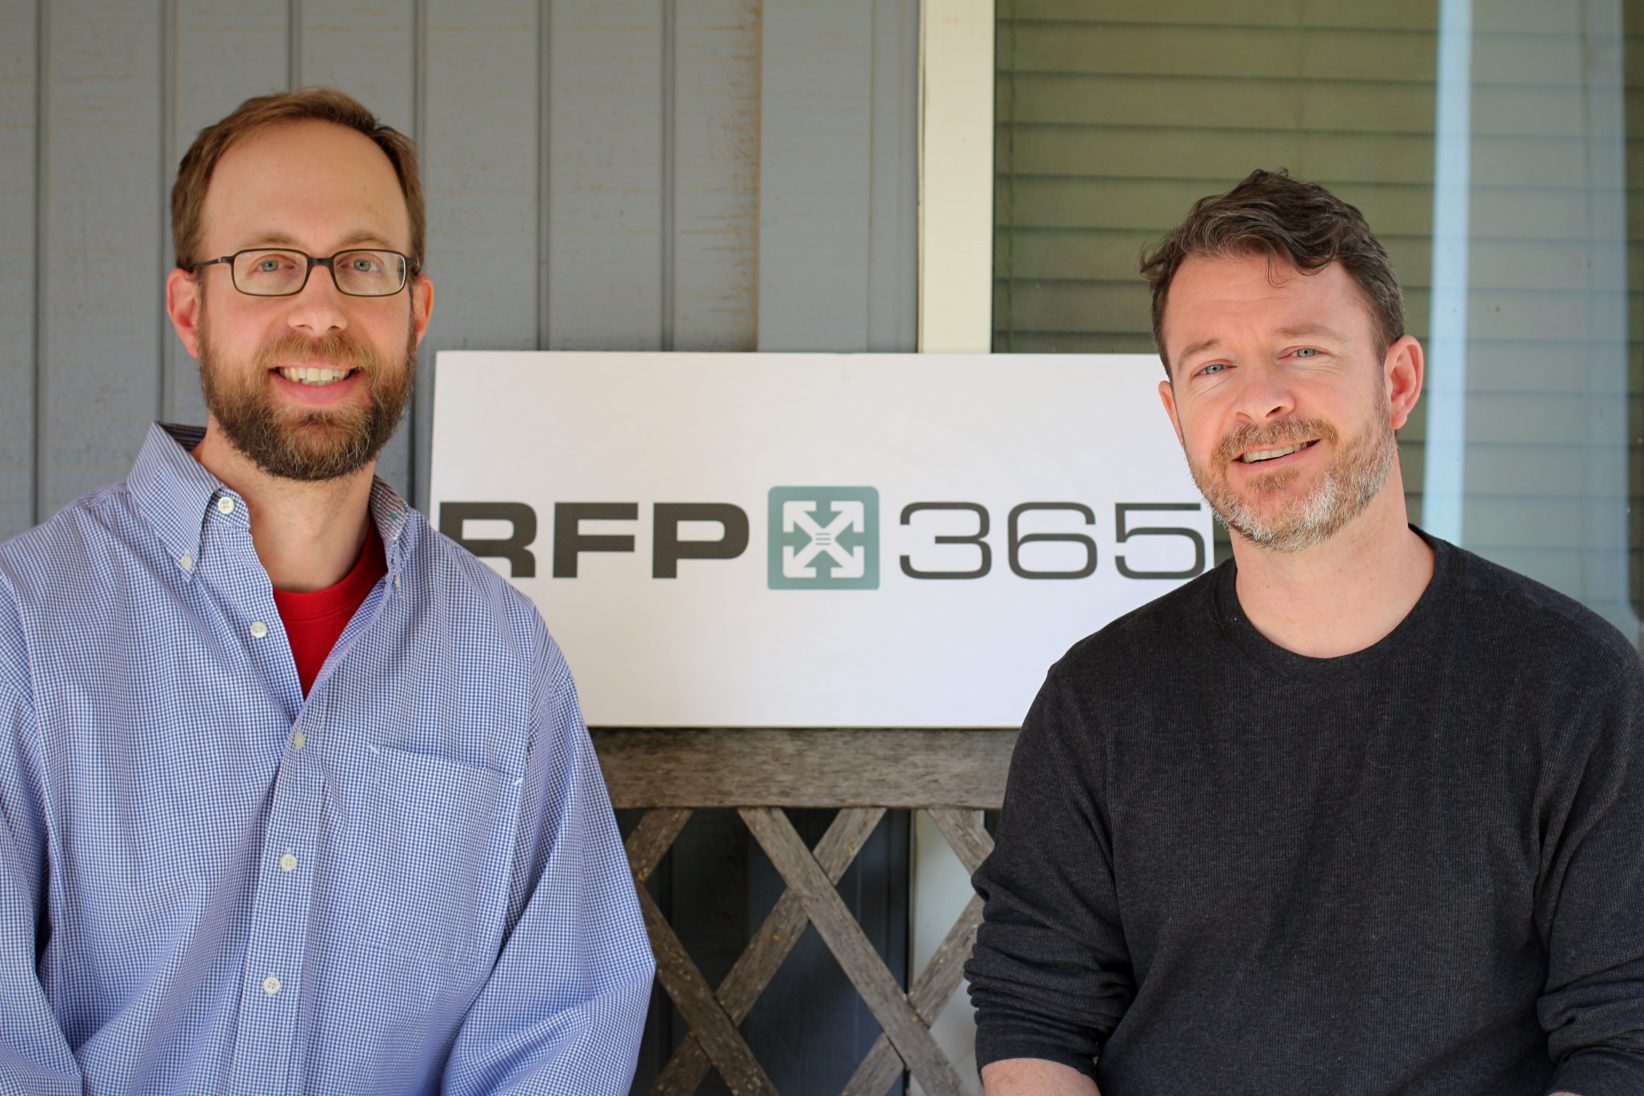 2018 Startups to Watch: RFP365 grows its Fortune 500 client base from KC roots